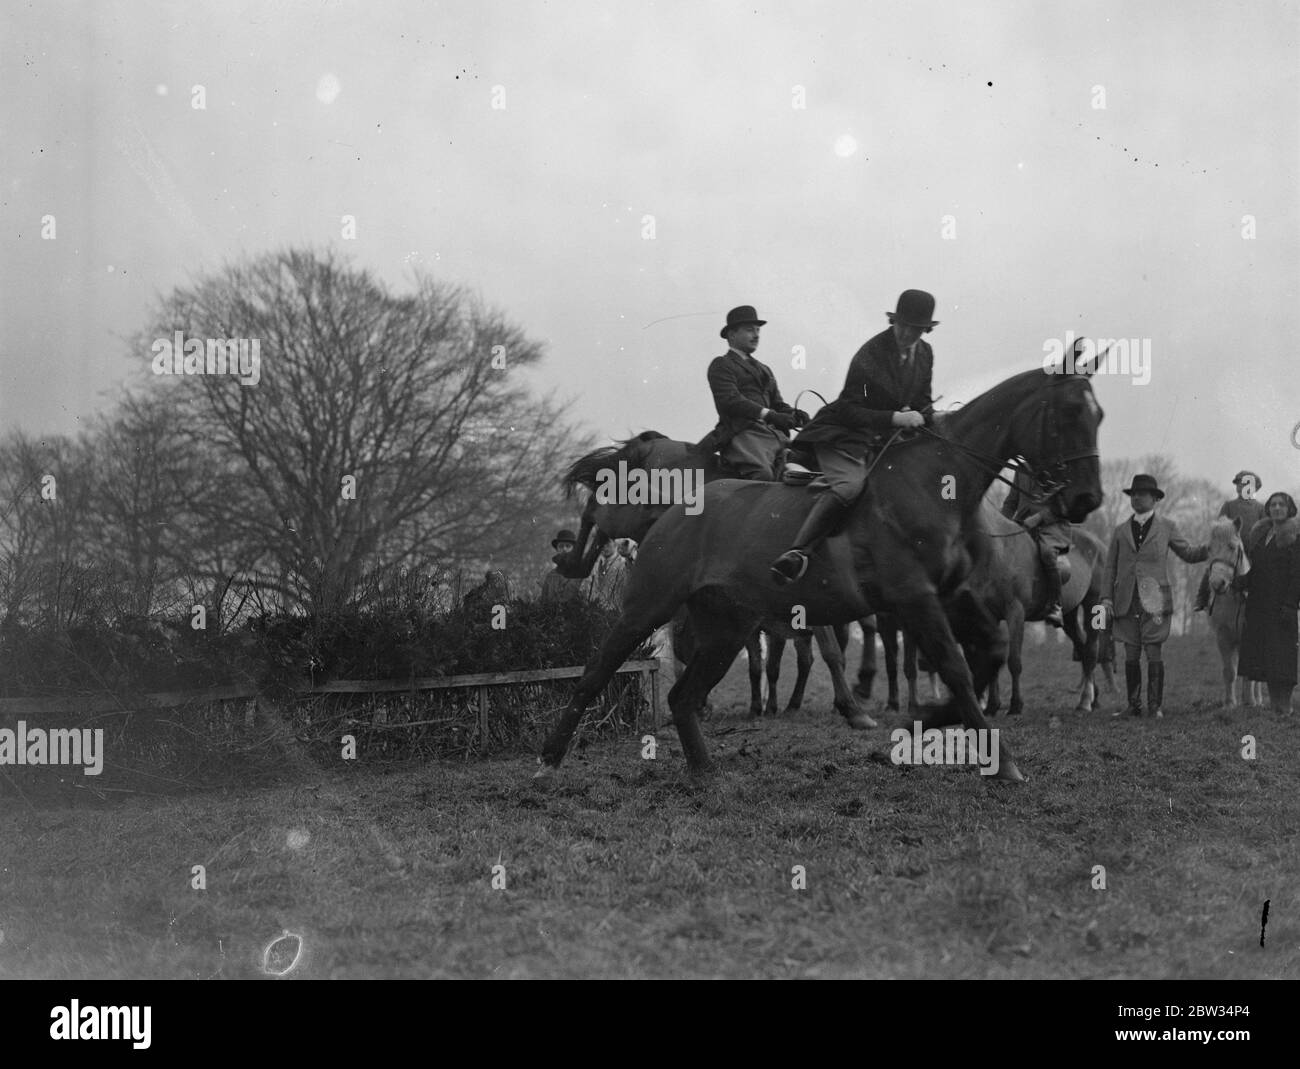 Members of Parliament learn to ride . Members of Parliament are learning to ride a newly formed riding school specially for them at Sanderstead , Surrey . Miss Vera Magee and Mr D B Joel M P taking a jump watched by other members of the school . 3 March 1932 Stock Photo